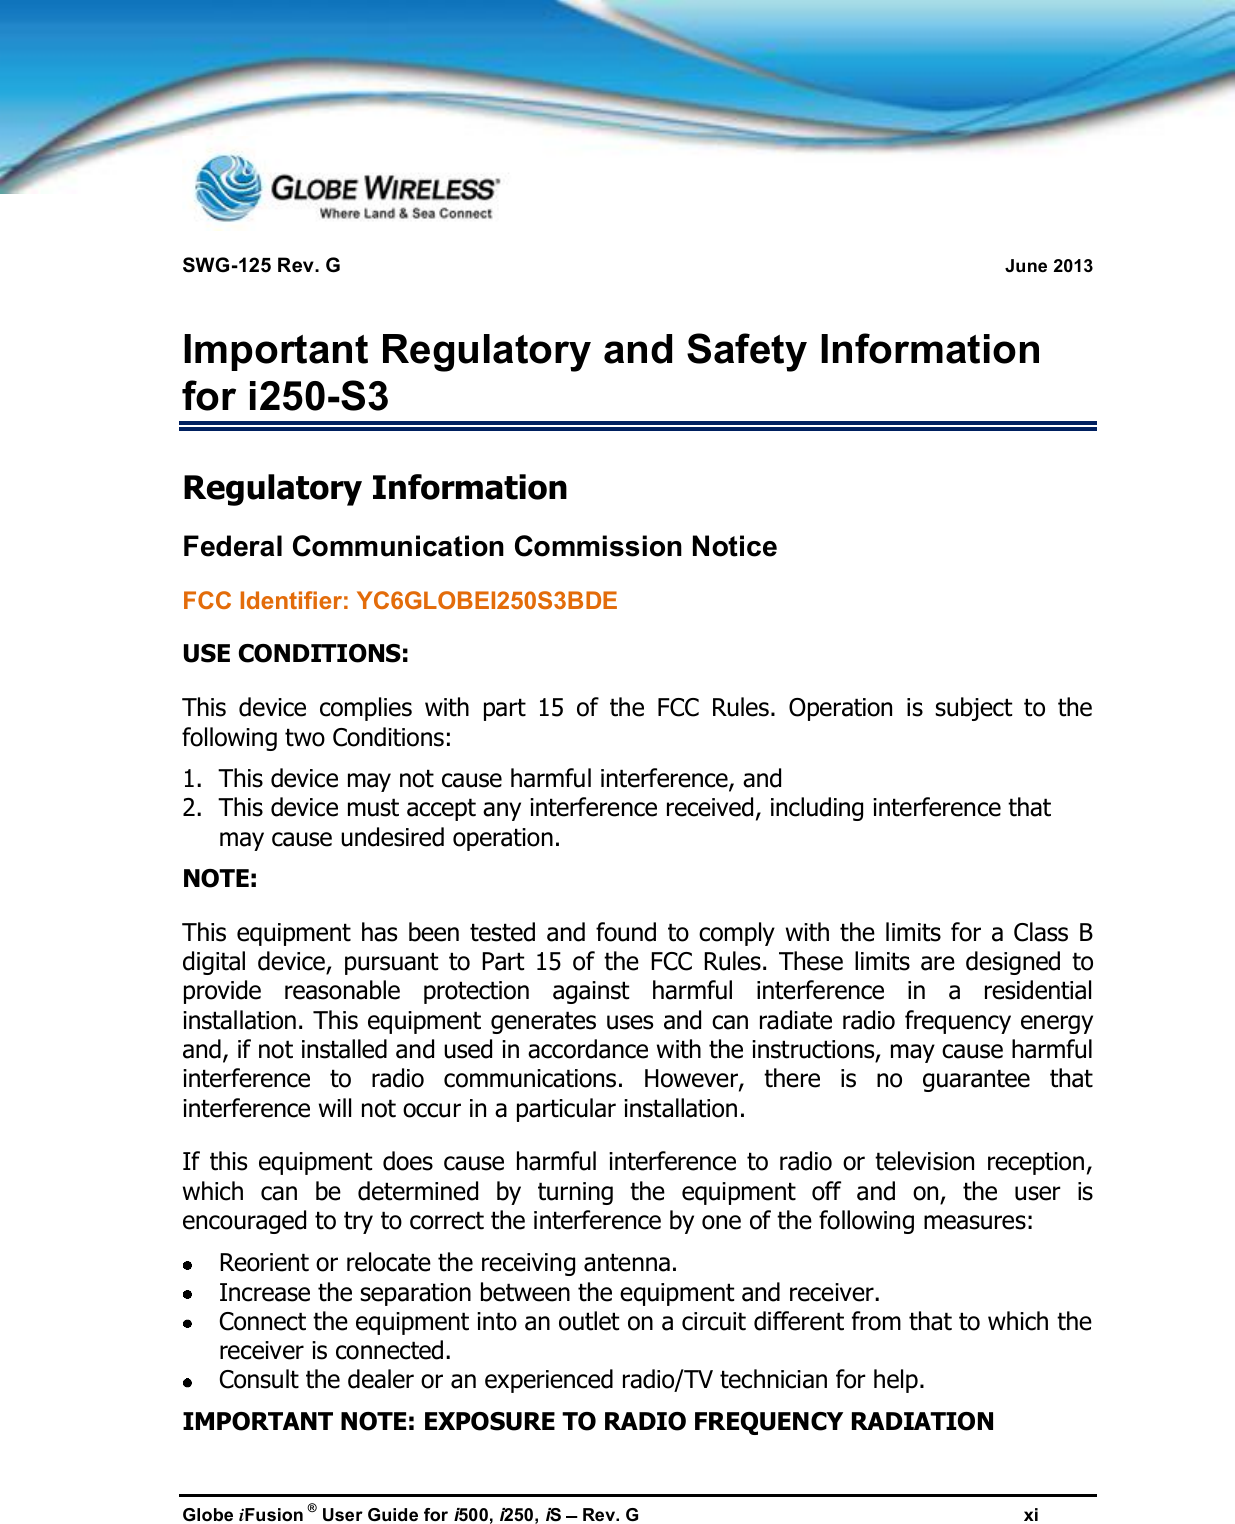 SWG-125 Rev. G June 2013Globe iFusion ®User Guide for i500, i250, iSRev. G xiImportant Regulatory and Safety Informationfor i250-S3Regulatory InformationFederal Communication Commission NoticeFCC Identifier: YC6GLOBEI250S3BDEUSE CONDITIONS:This device complies with part 15 of the FCC Rules. Operation is subject to thefollowing two Conditions:1. This device may not cause harmful interference, and2. This device must accept any interference received, including interference thatmay cause undesired operation.NOTE:This equipment has been tested and found to comply with the limits for a Class Bdigital device, pursuant to Part 15 of the FCC Rules. These limits are designed toprovide reasonable protection against harmful interference in a residentialinstallation. This equipment generates uses and can radiate radio frequency energyand, if not installed and used in accordance with the instructions, may cause harmfulinterference to radio communications. However, there is no guarantee thatinterference will not occur in a particular installation.If this equipment does cause harmful interference to radio or television reception,which can be determined by turning the equipment off and on, the user isencouraged to try to correct the interference by one of the following measures:Reorient or relocate the receiving antenna.Increase the separation between the equipment and receiver.Connect the equipment into an outlet on a circuit different from that to which thereceiver is connected.Consult the dealer or an experienced radio/TV technician for help.IMPORTANT NOTE: EXPOSURE TO RADIO FREQUENCY RADIATION